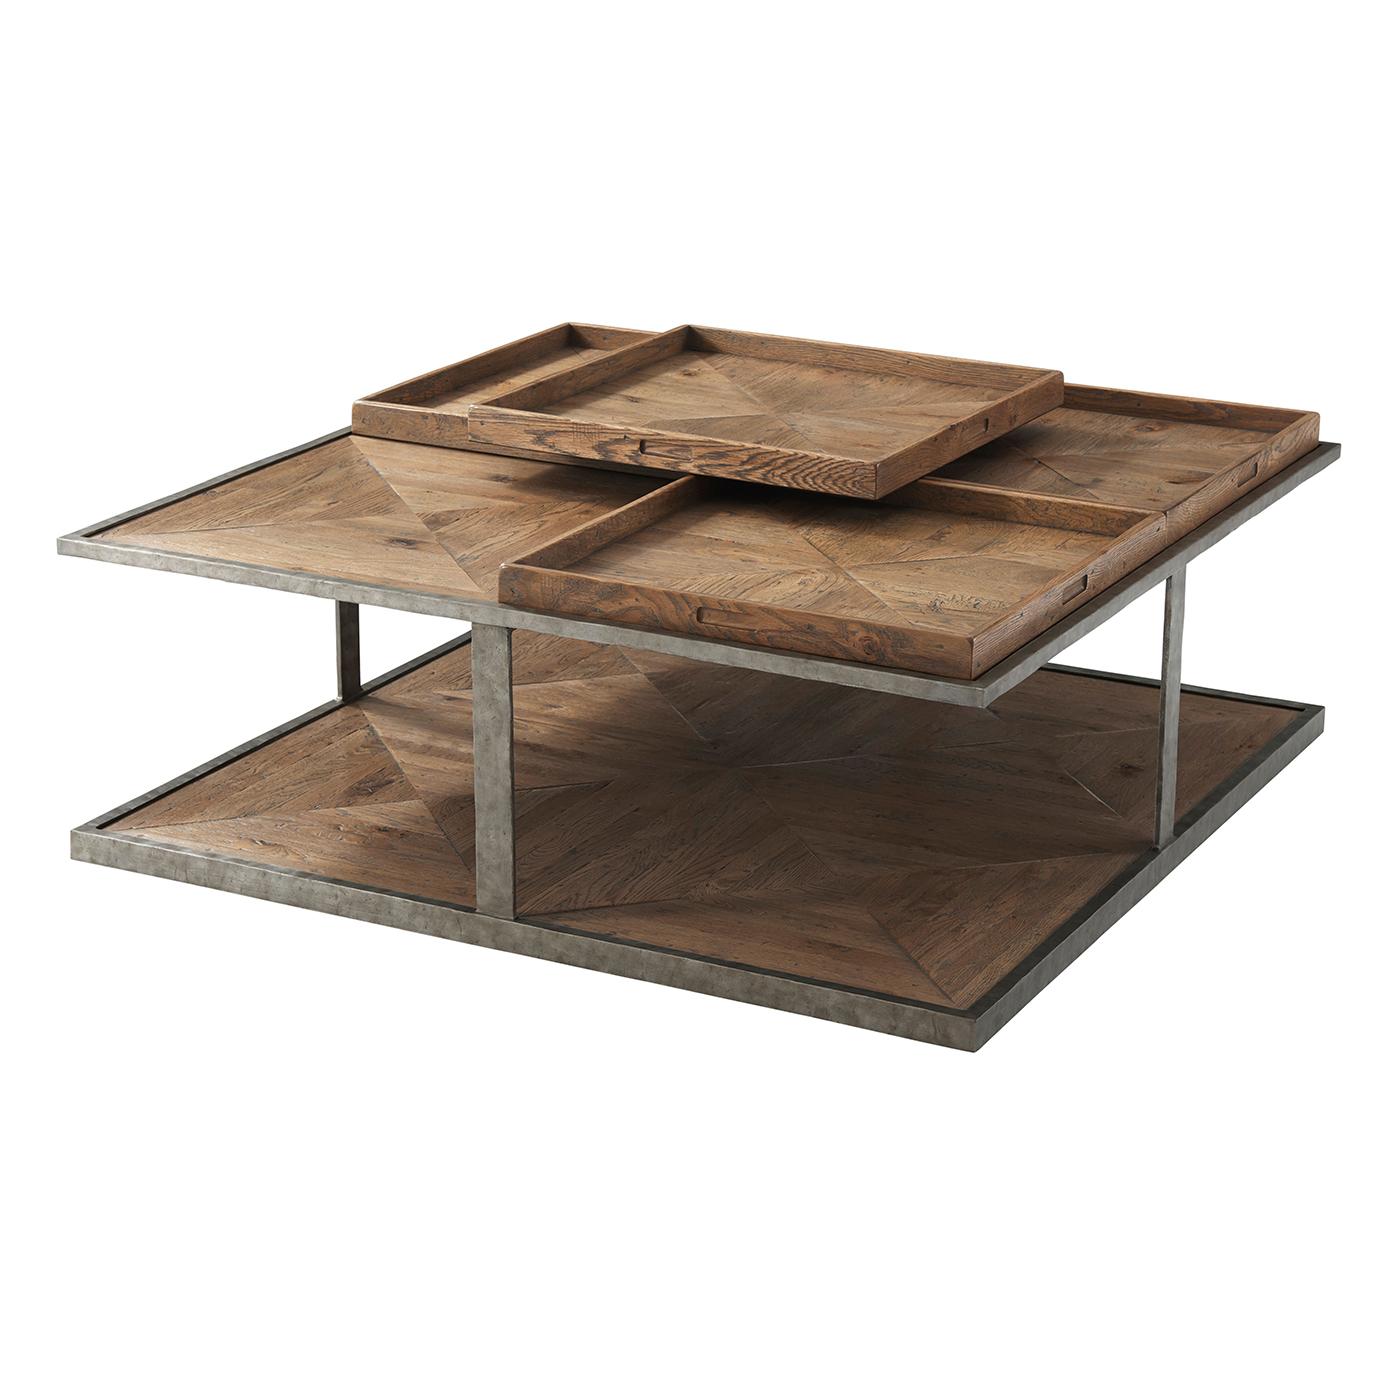 A rustic square coffee table with our 'echo' finish oak parquetry top and base with four tray inserts on a 'vintage' metal support frame.
Dimensions: 48